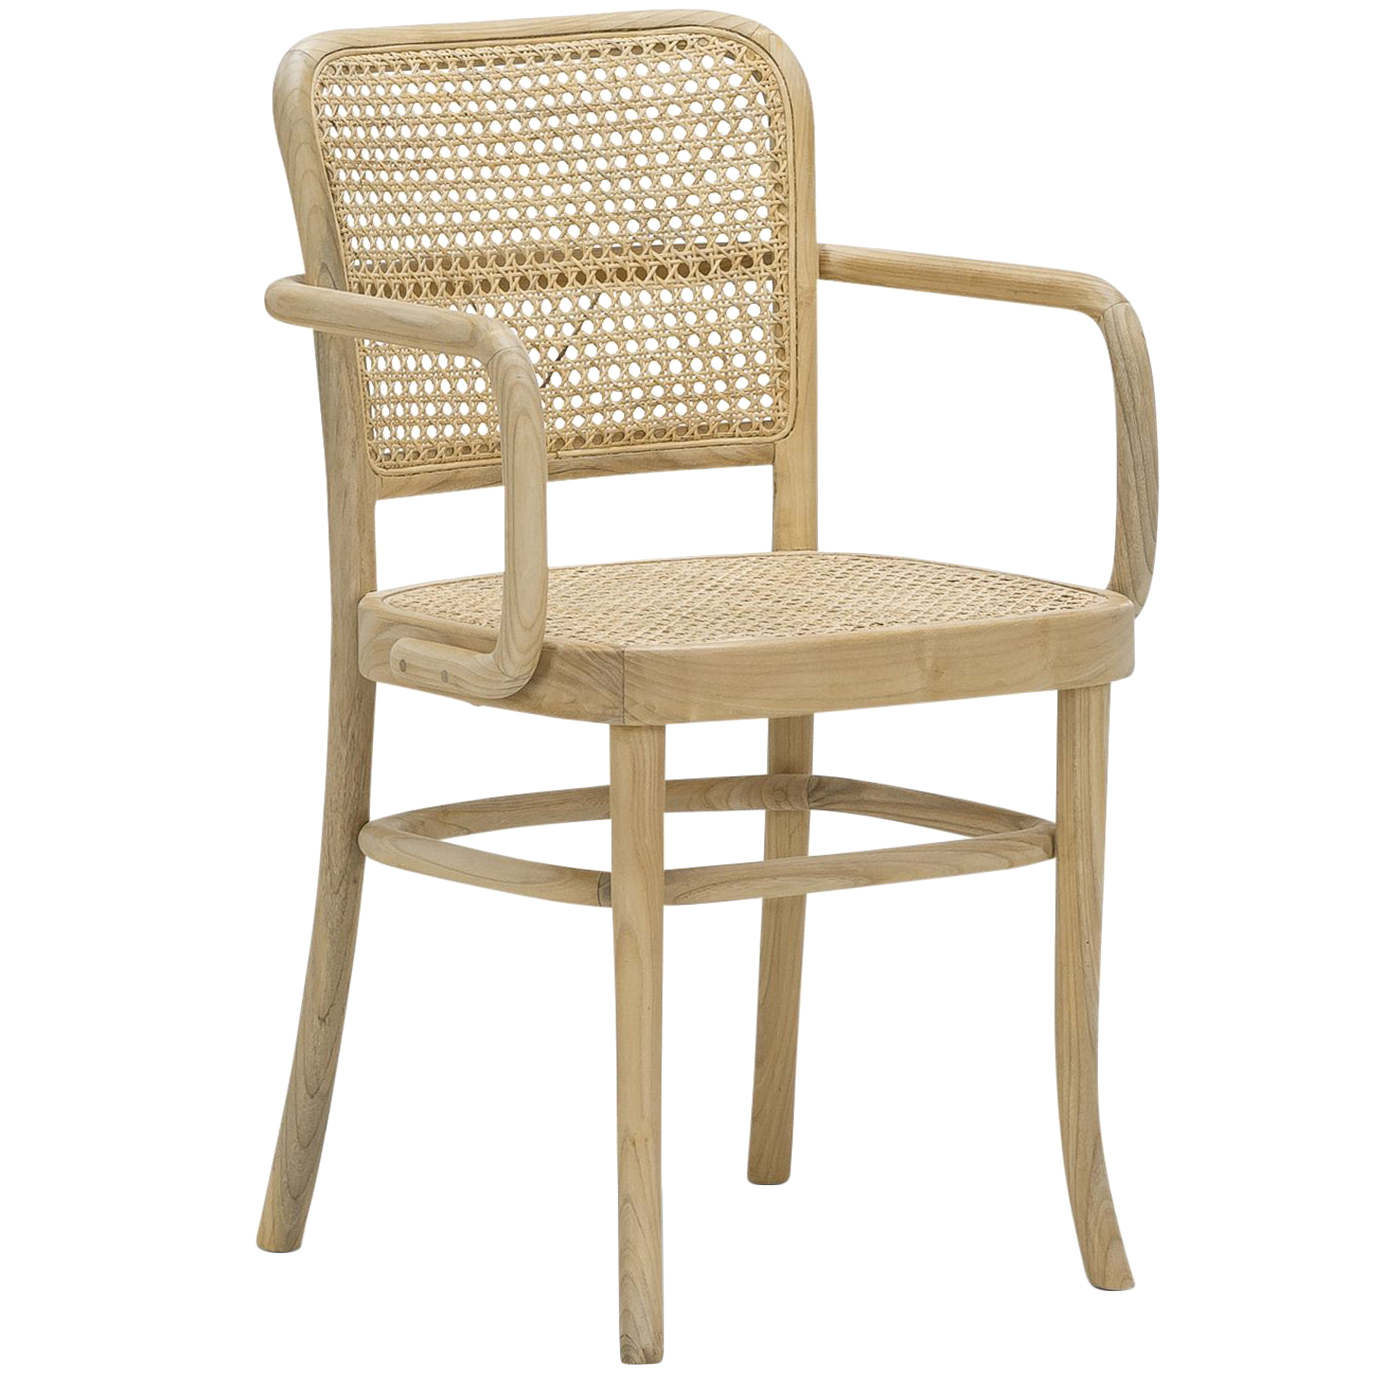 Samira Teak Cane Dining Chair With Arms Temple Webster